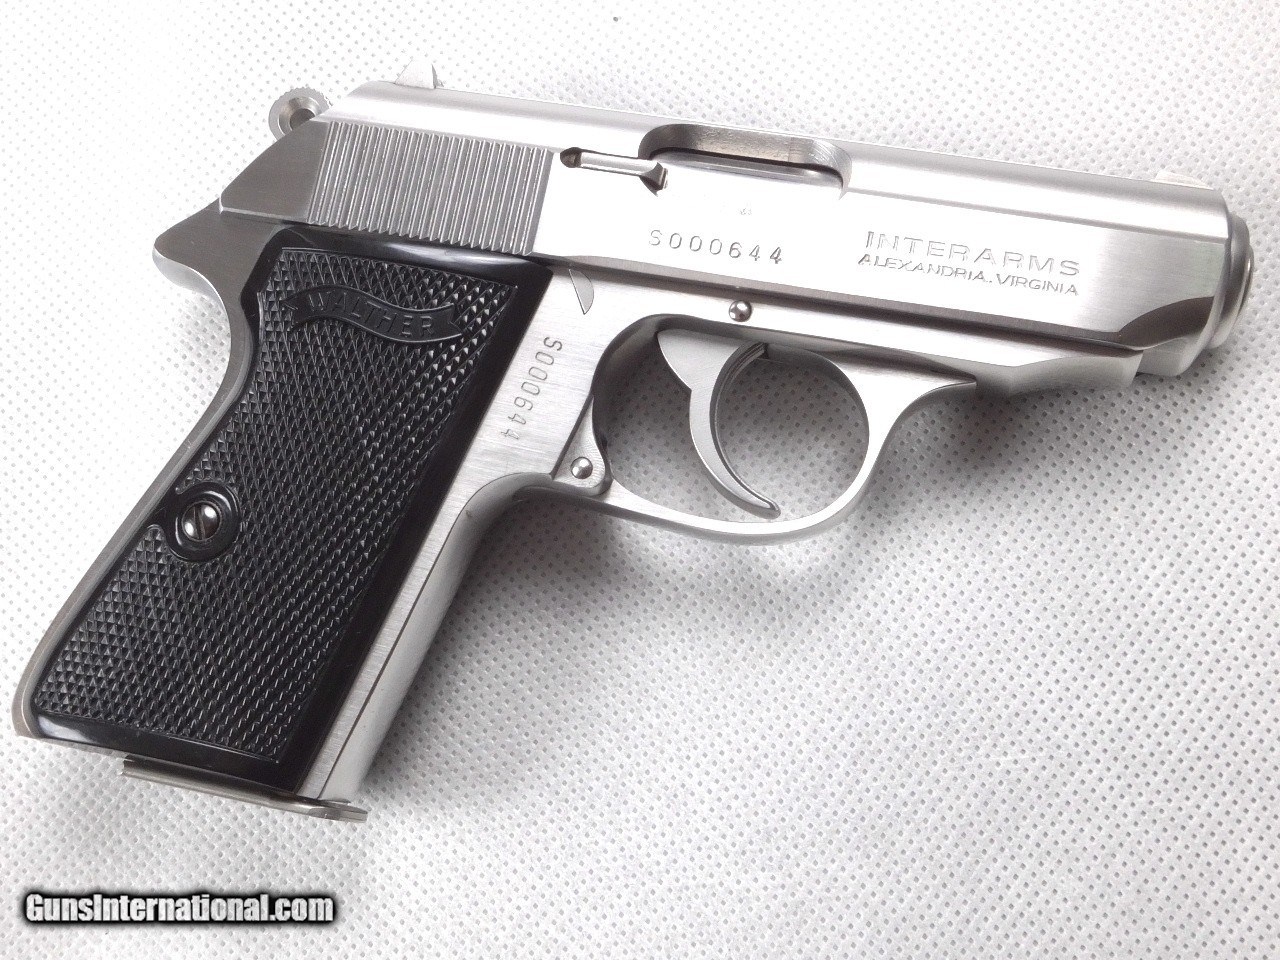 Look up walther ppk by serial number